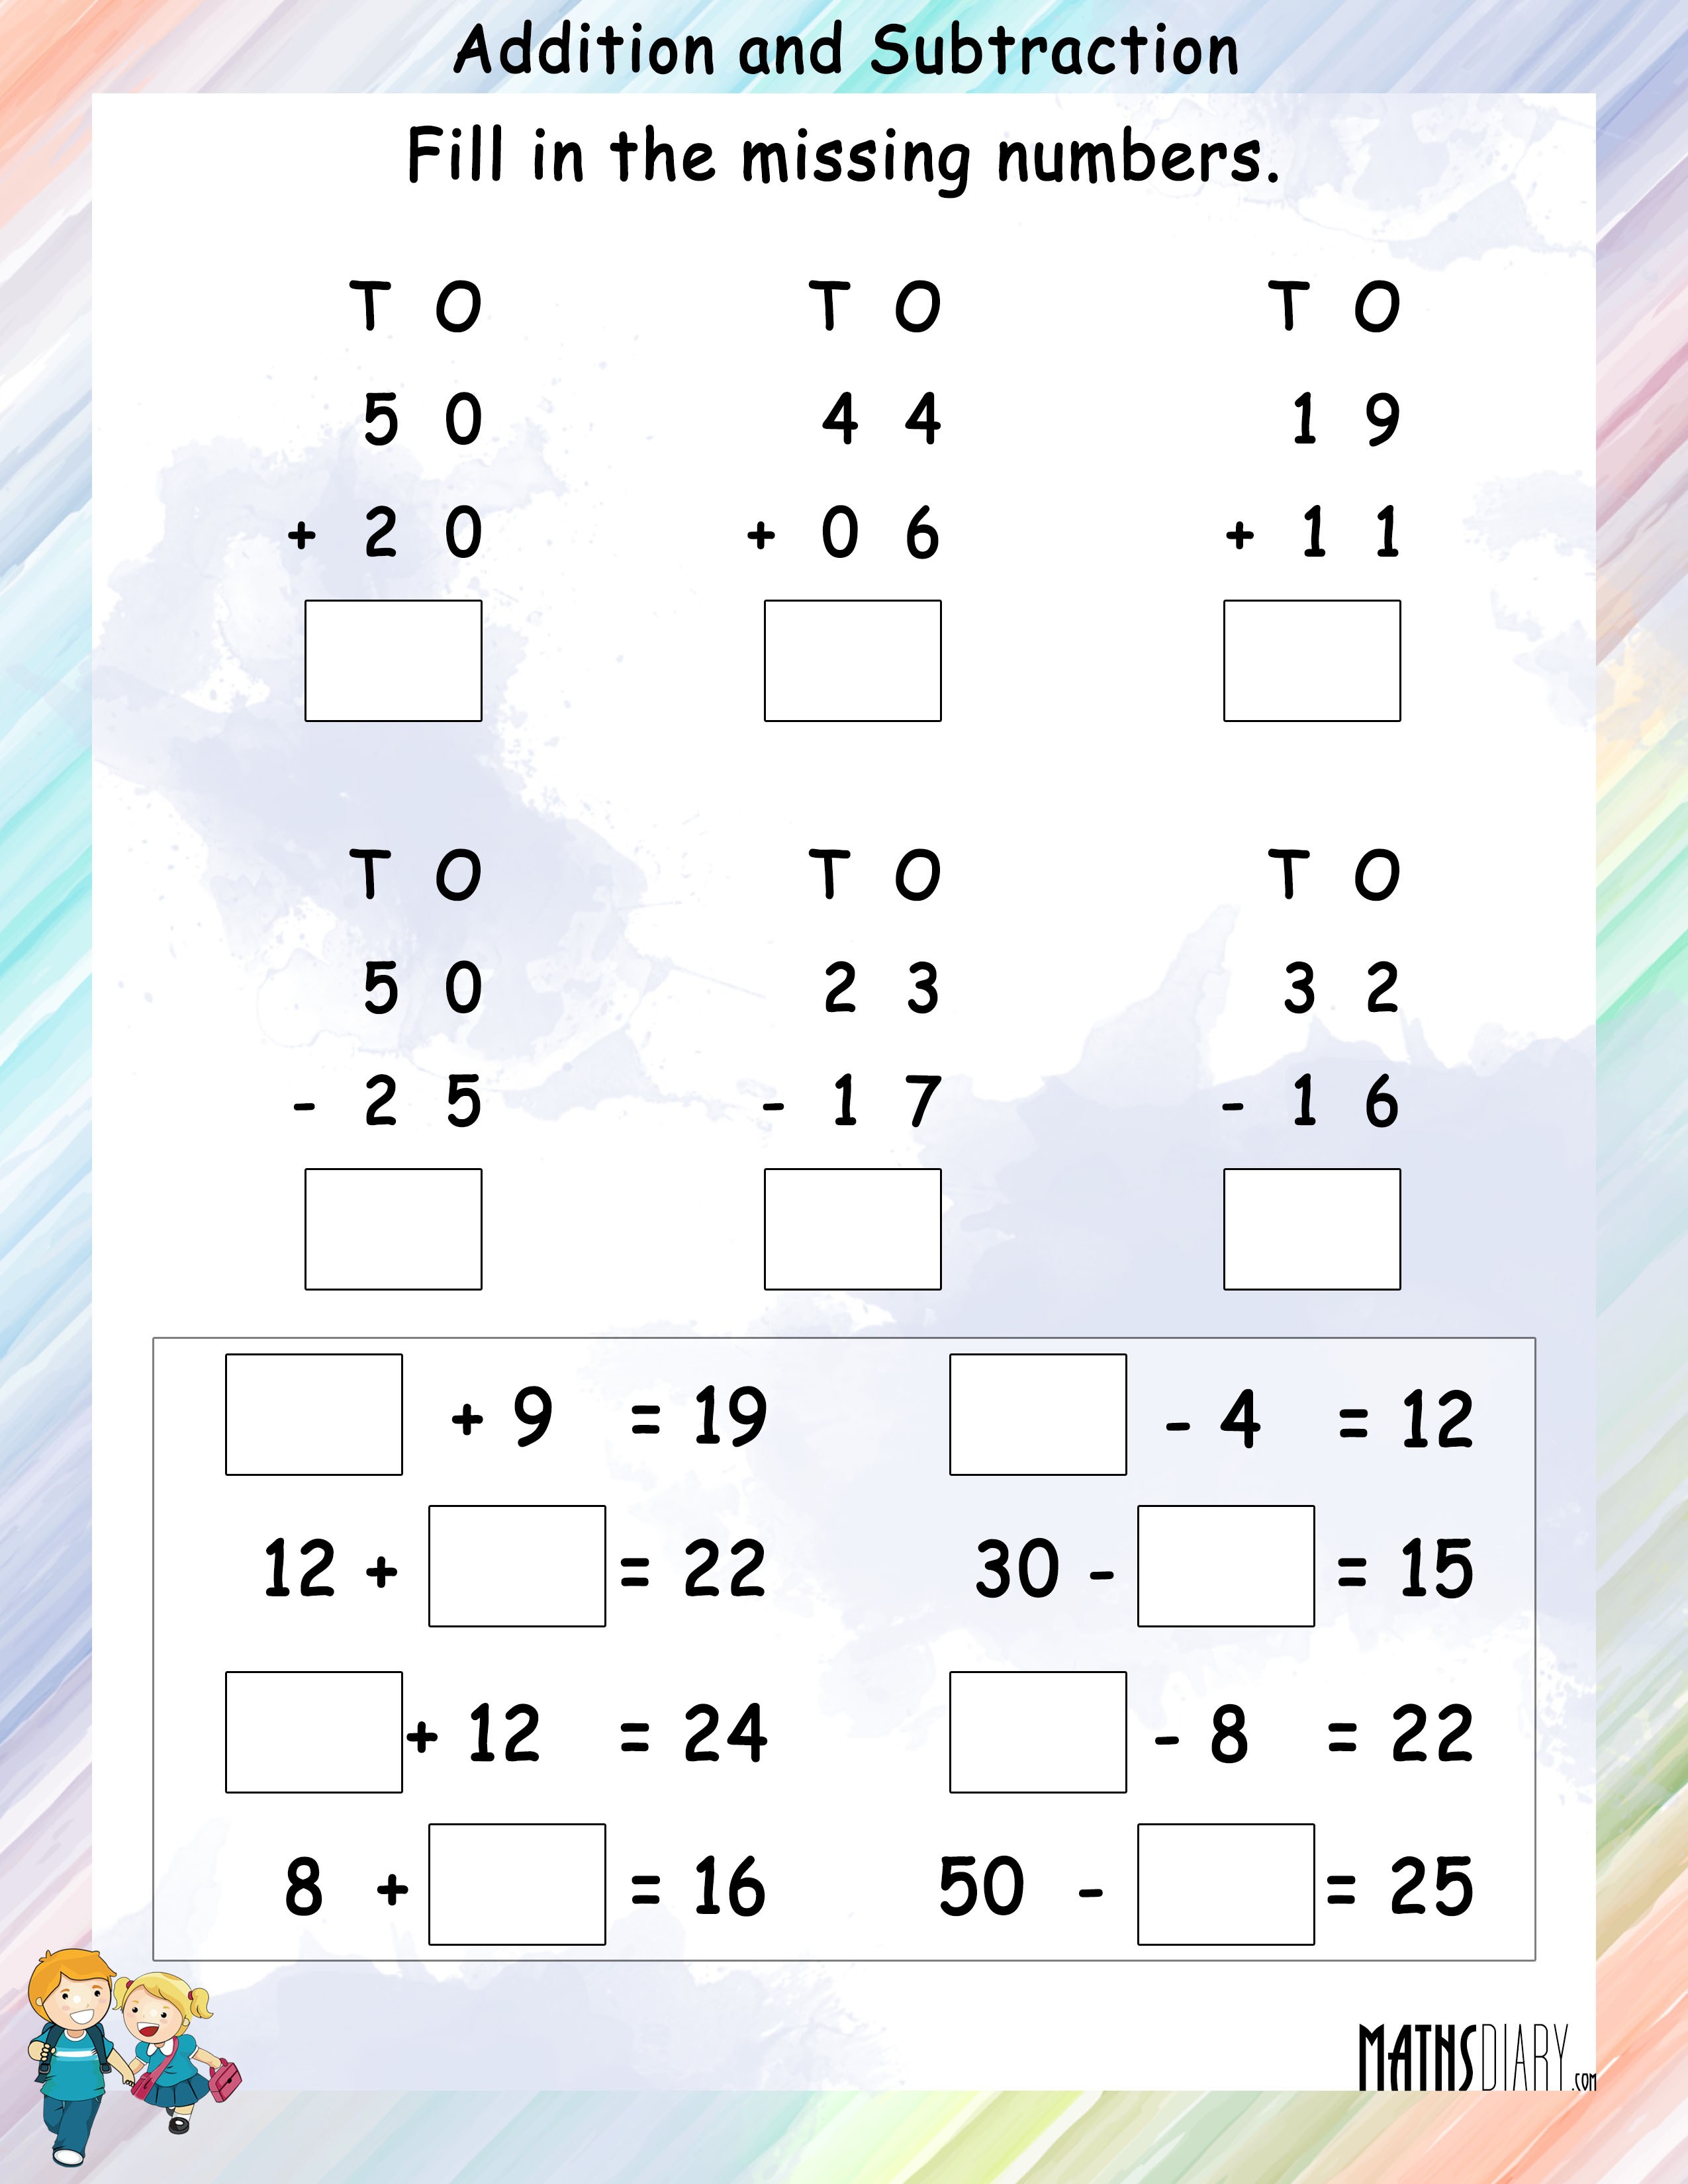 Addition Subtraction Math Worksheets MathsDiary com